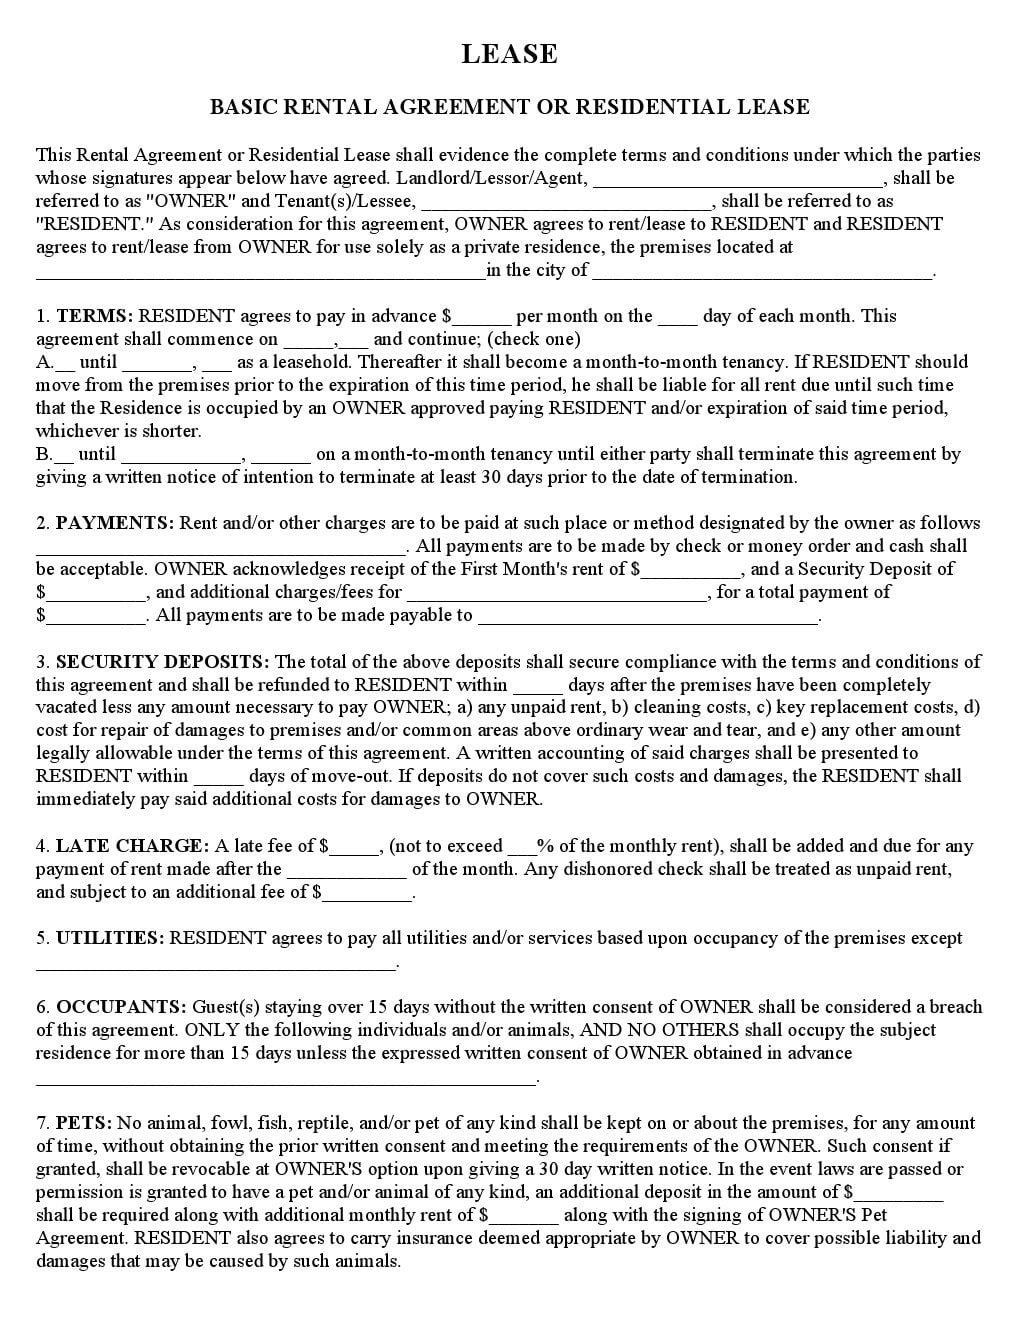 Free Printable Basic Residential Lease Agreement